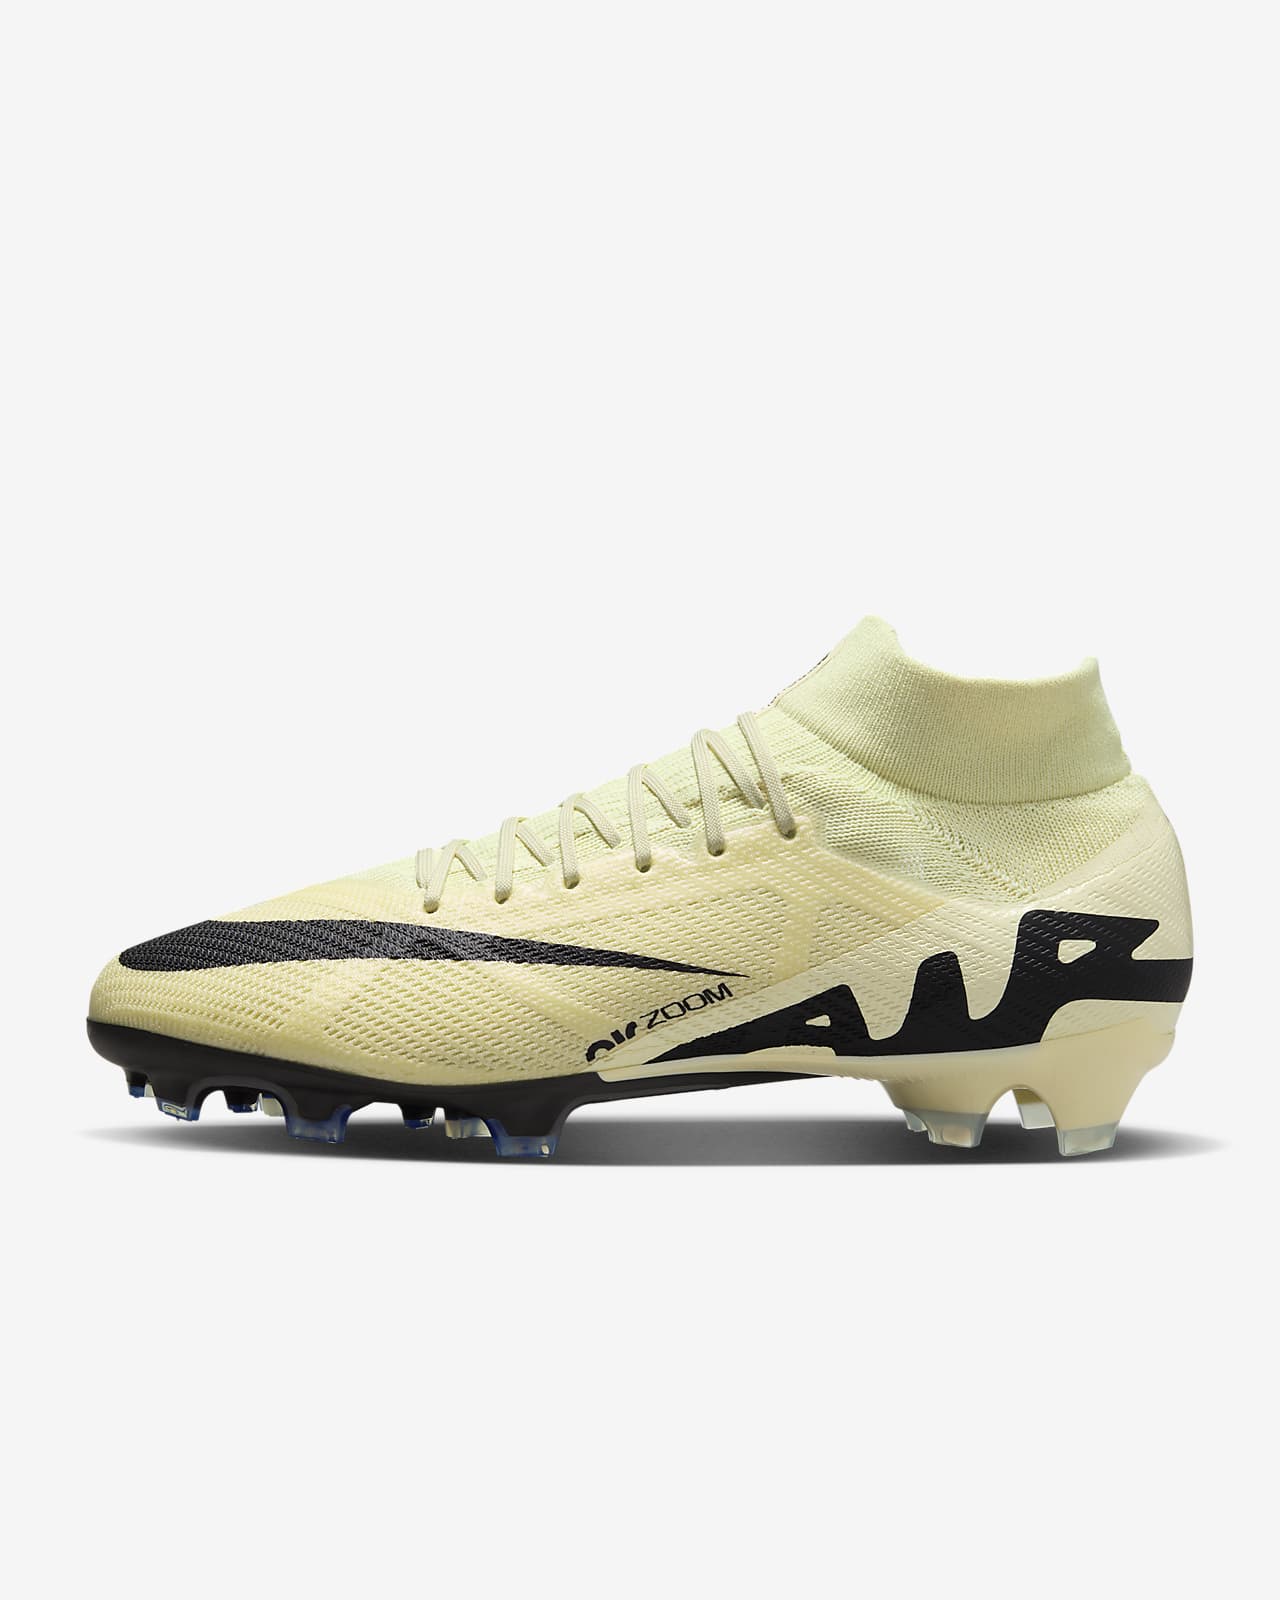 Chaussures de Football pour hommes, crampons football homme